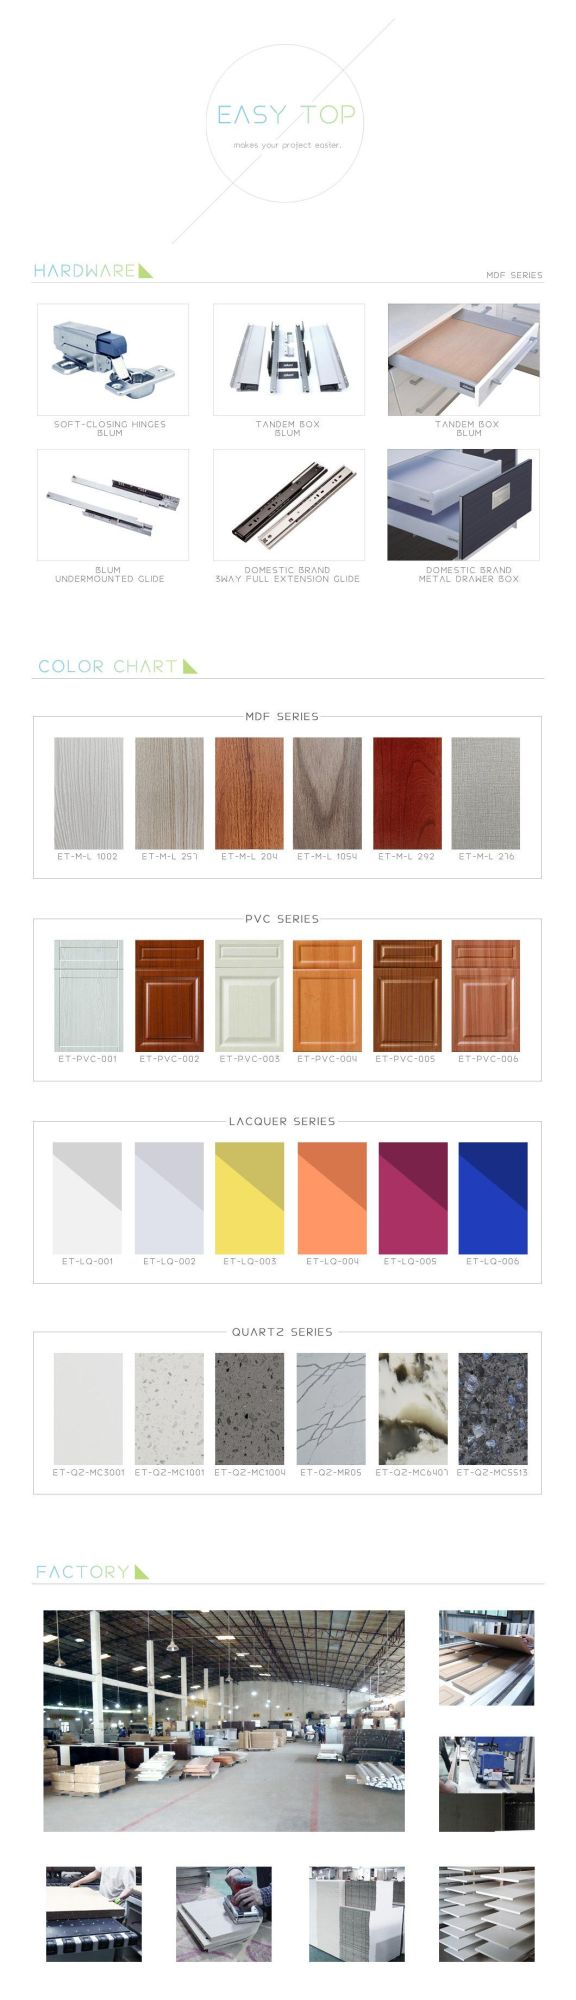 High Gloss Lacquer MDF Modern Kitchen Design Cupboard Customized Cabinet